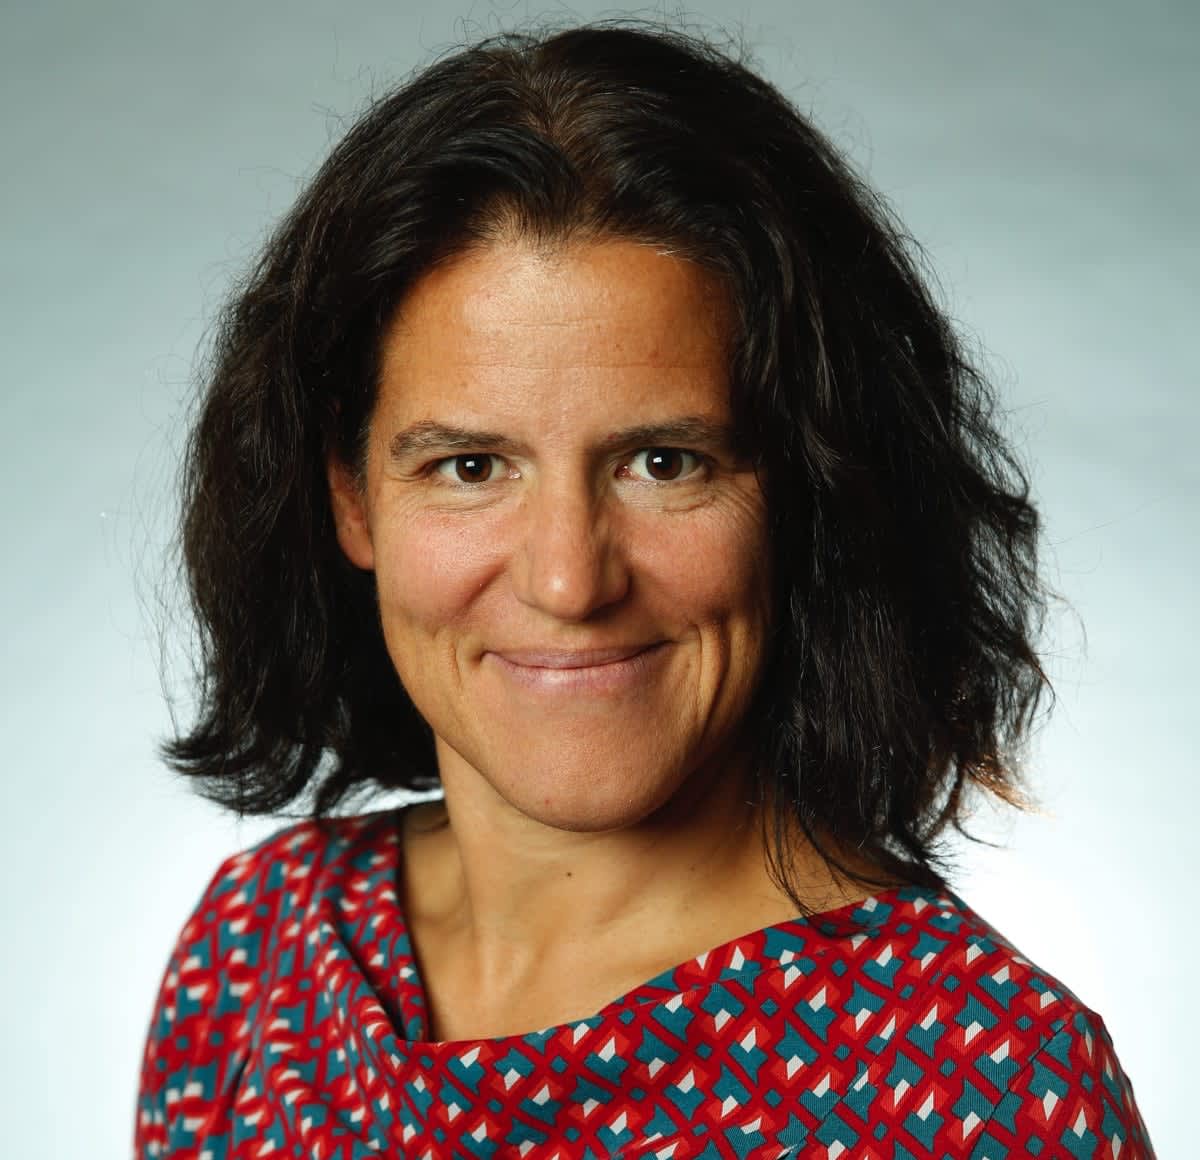 Picture of Maria Farcet, director of Cell Culture, Virus Models & Serology